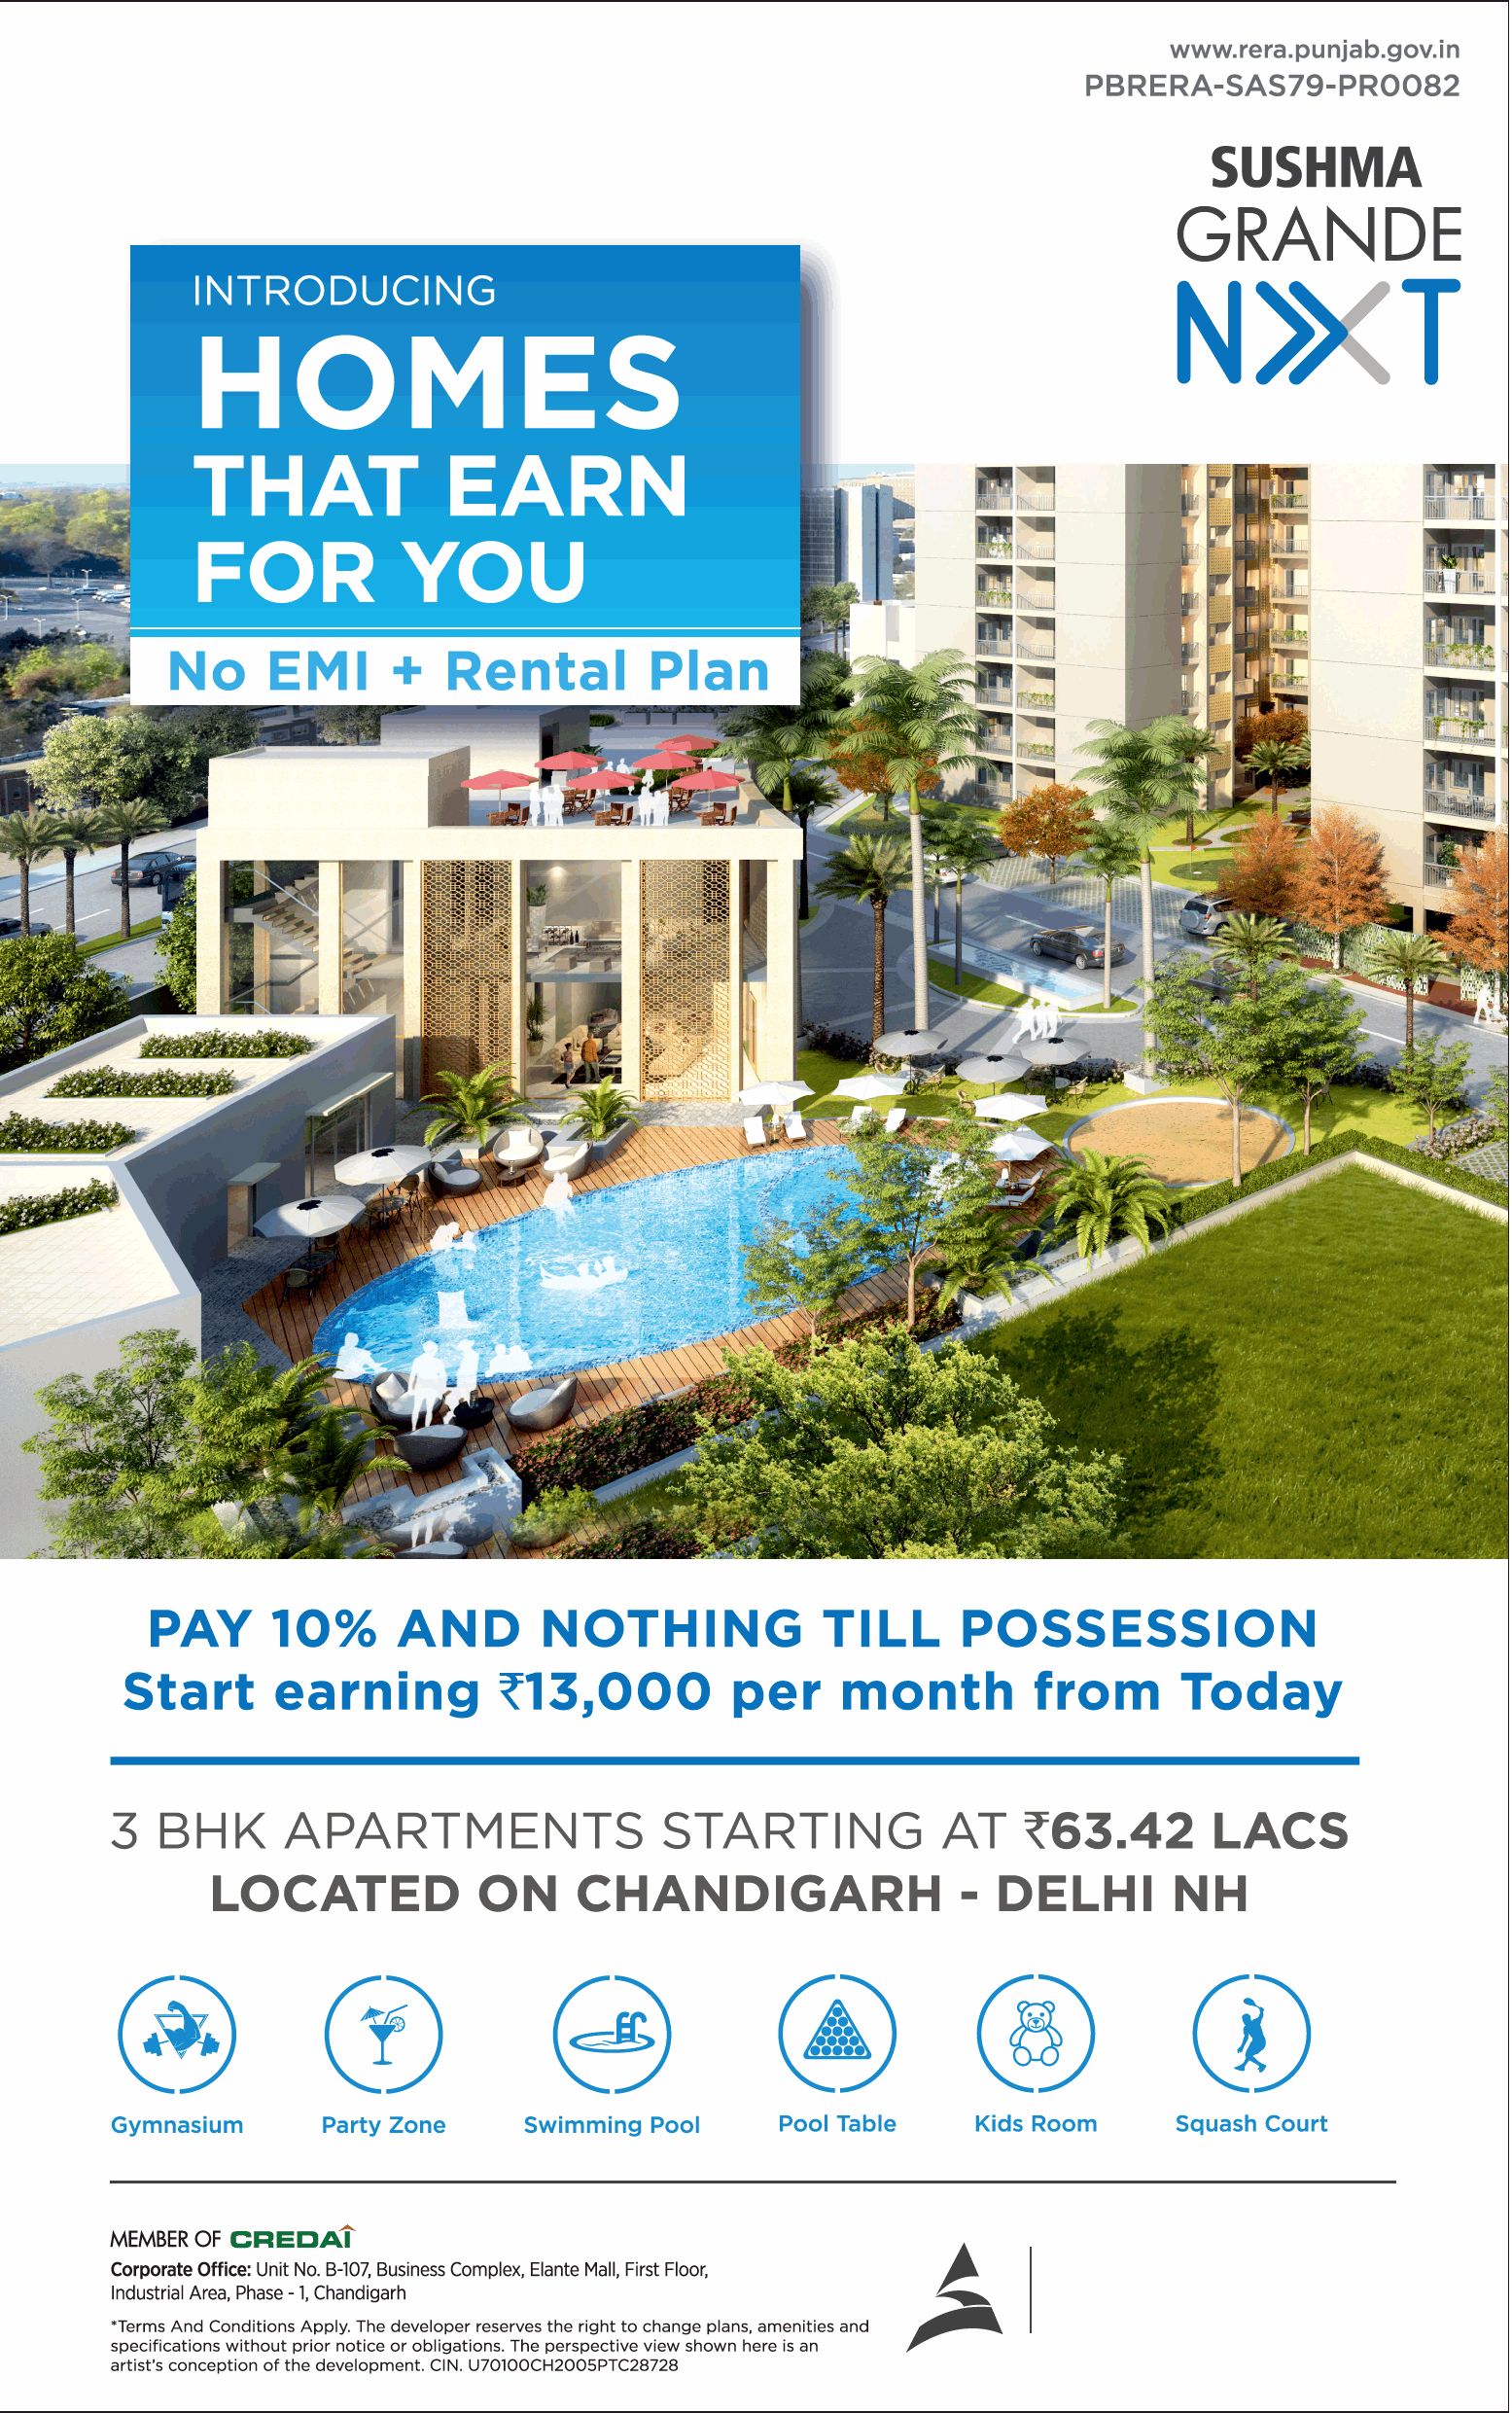 Book 3 BHK apartments starting at Rs 63.42 Lacs at Sushma Grande Nxt in Chandigarh